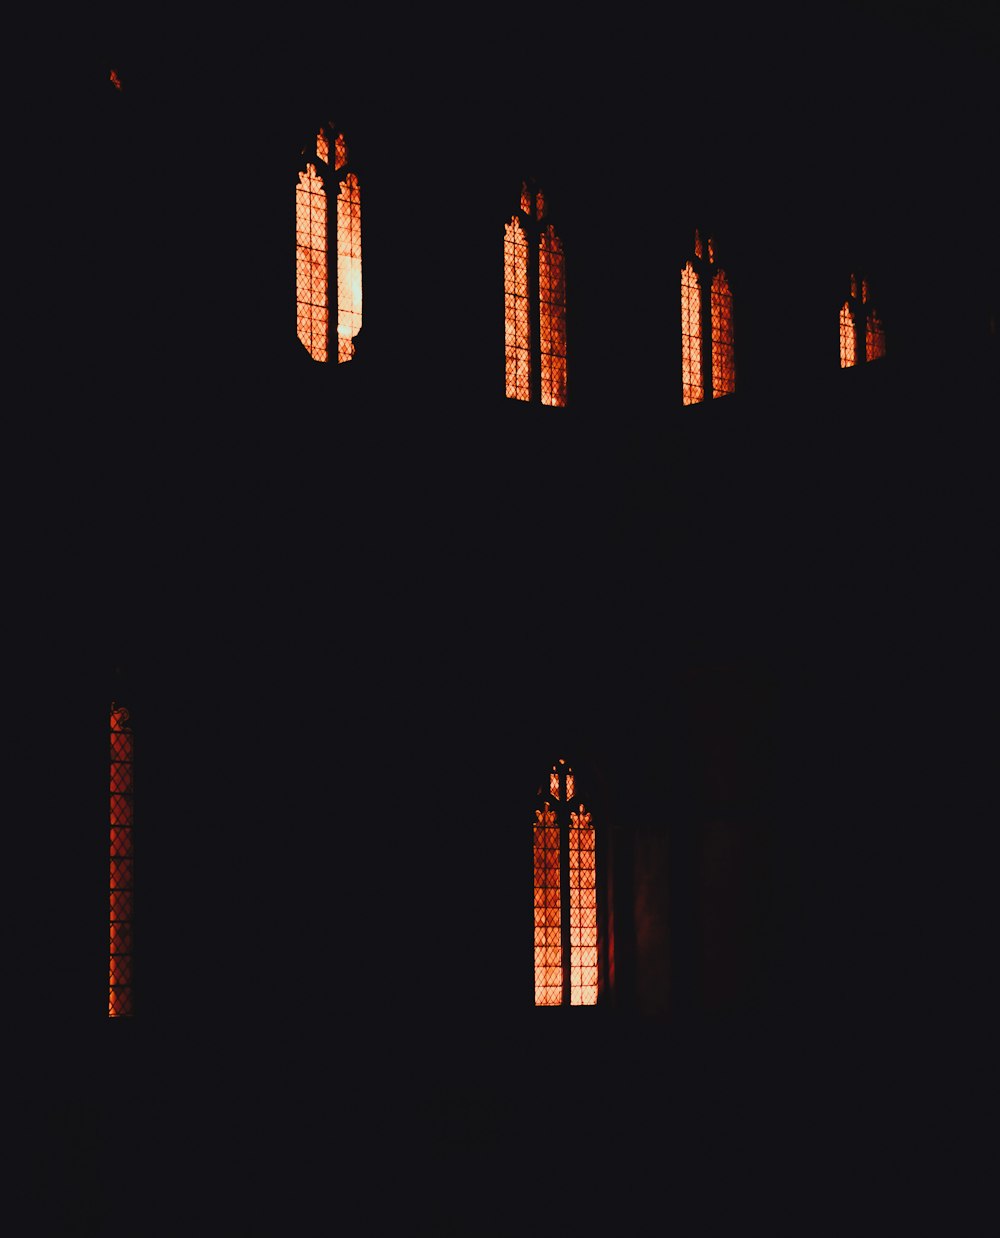 a building with many windows lit up in the dark